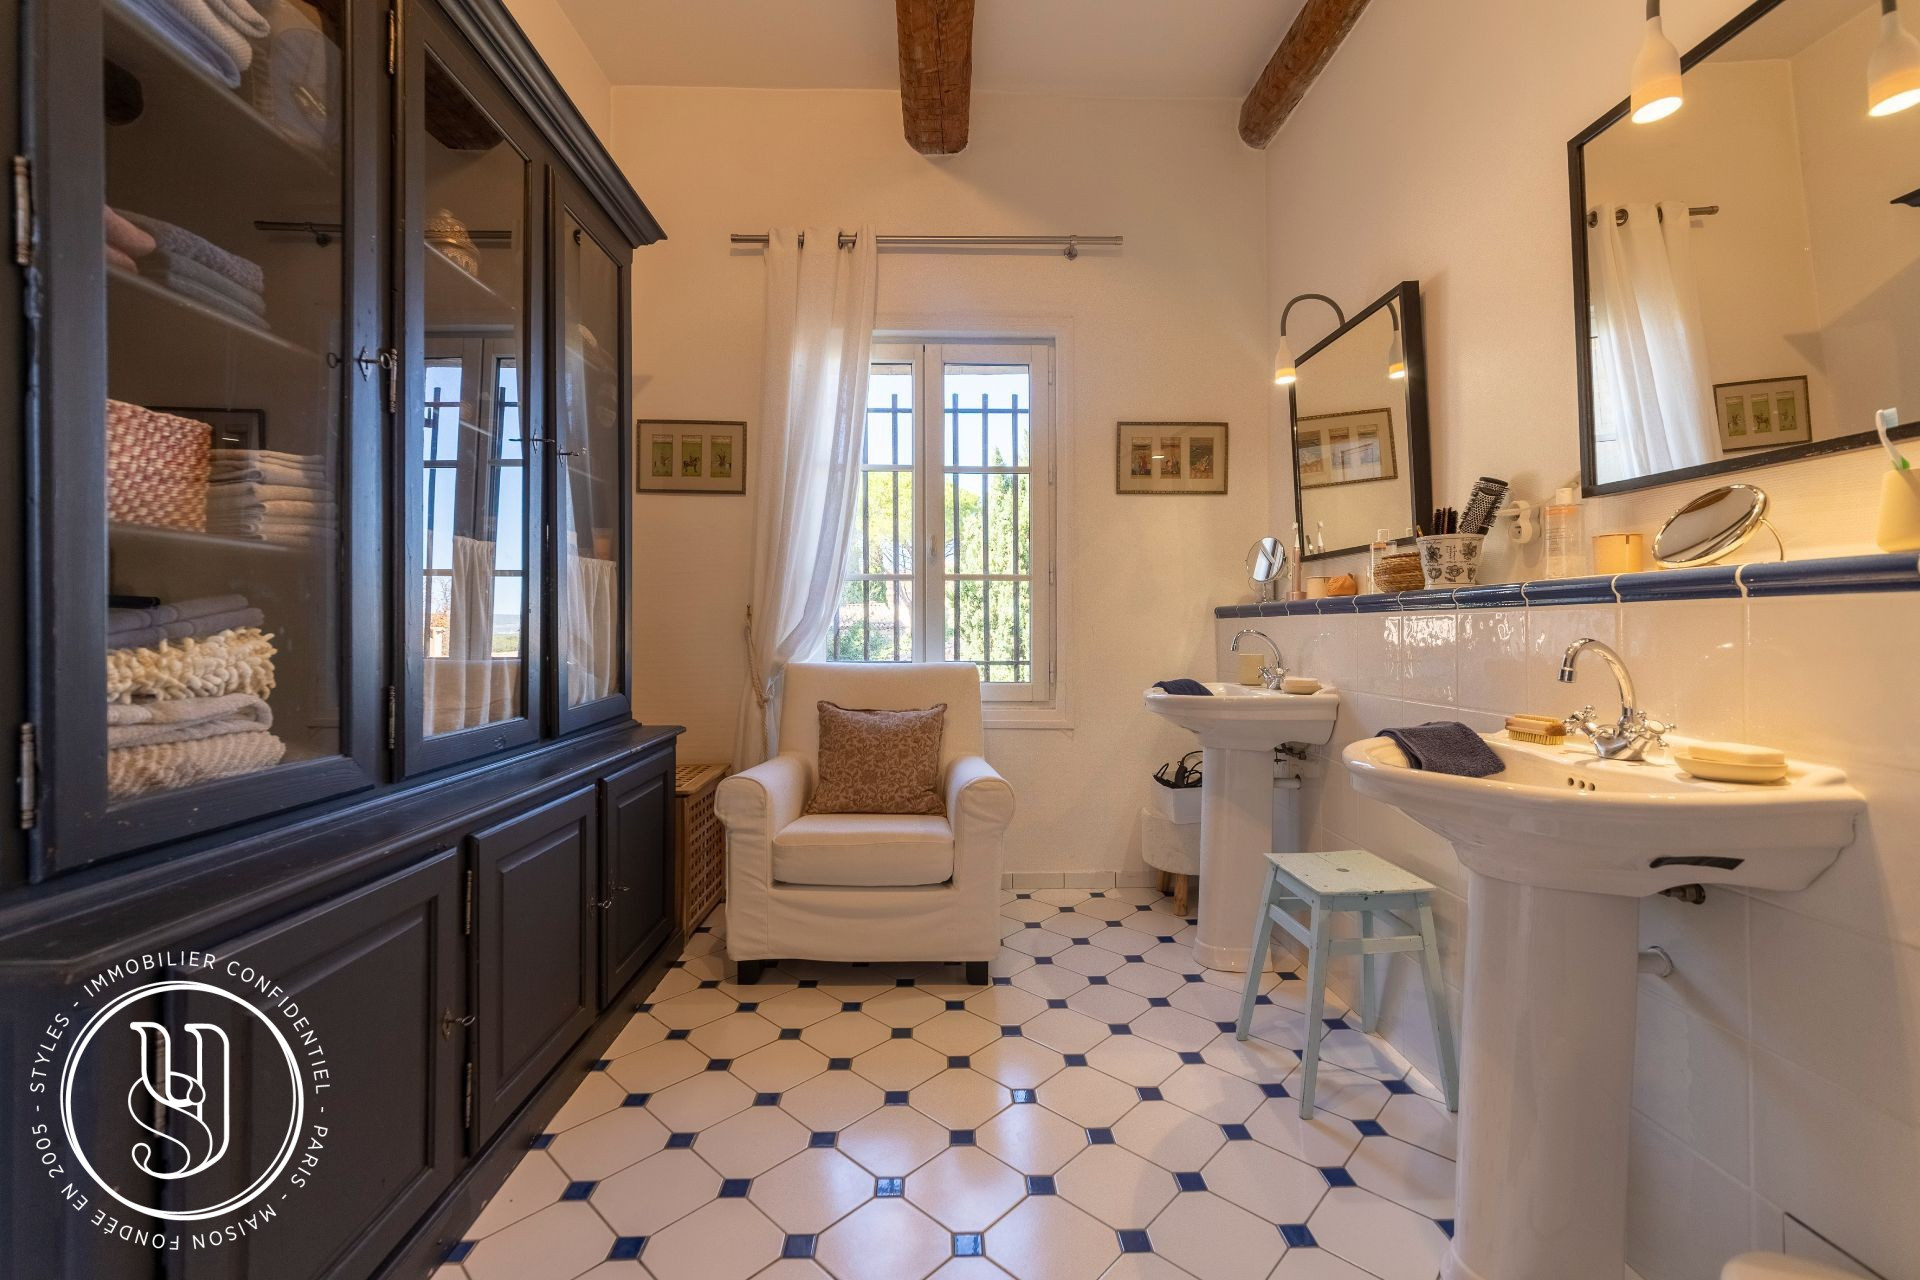 Uzes - surroundings, sold by S T Y LE S, a beautiful, refined and ele - image 15